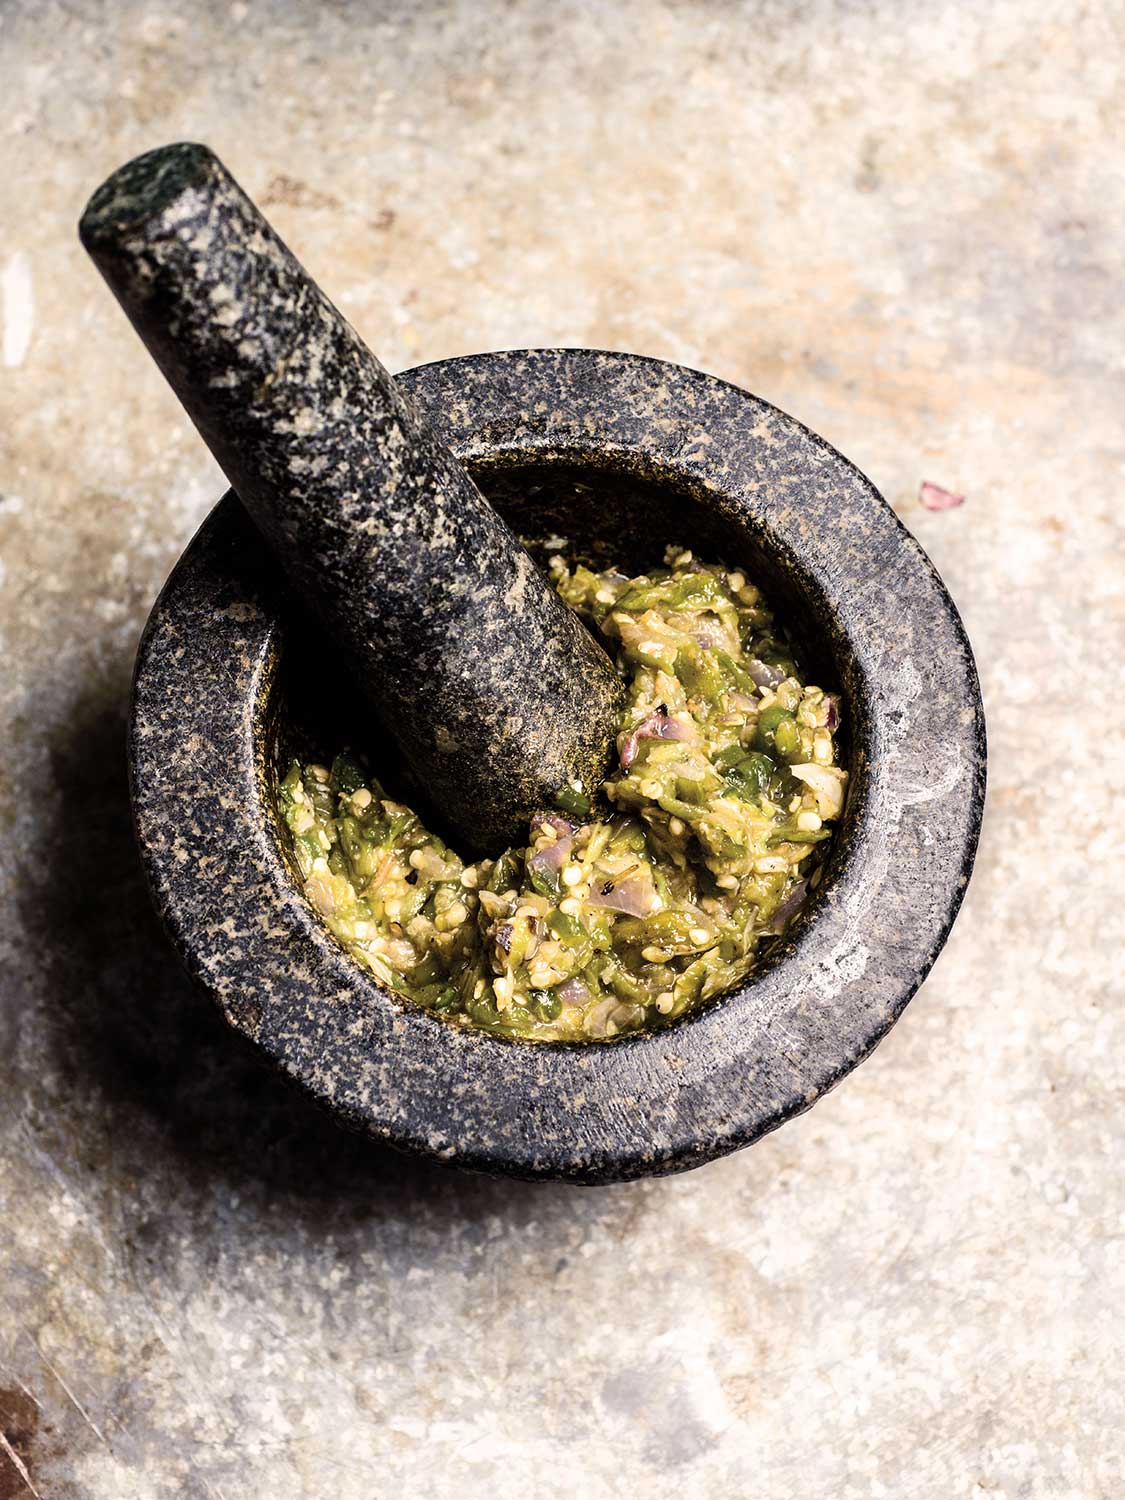 Grilled-Chile Dip with Shallots and Garlic (Nam Phrik Num)